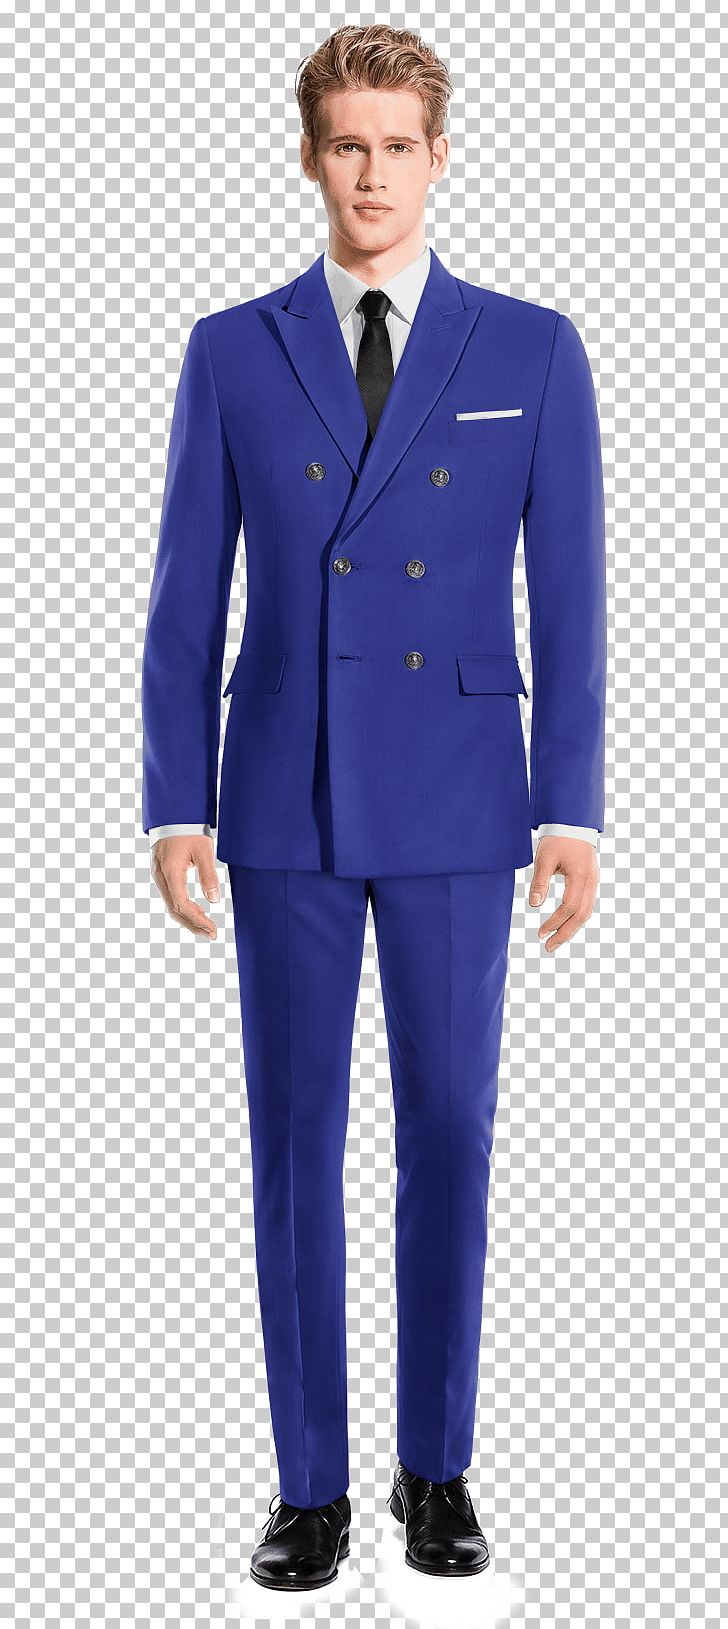 Suit Pants Blue Clothing Lapel Pin PNG, Clipart, Black, Blazer, Blue, Businessperson, Chino Cloth Free PNG Download